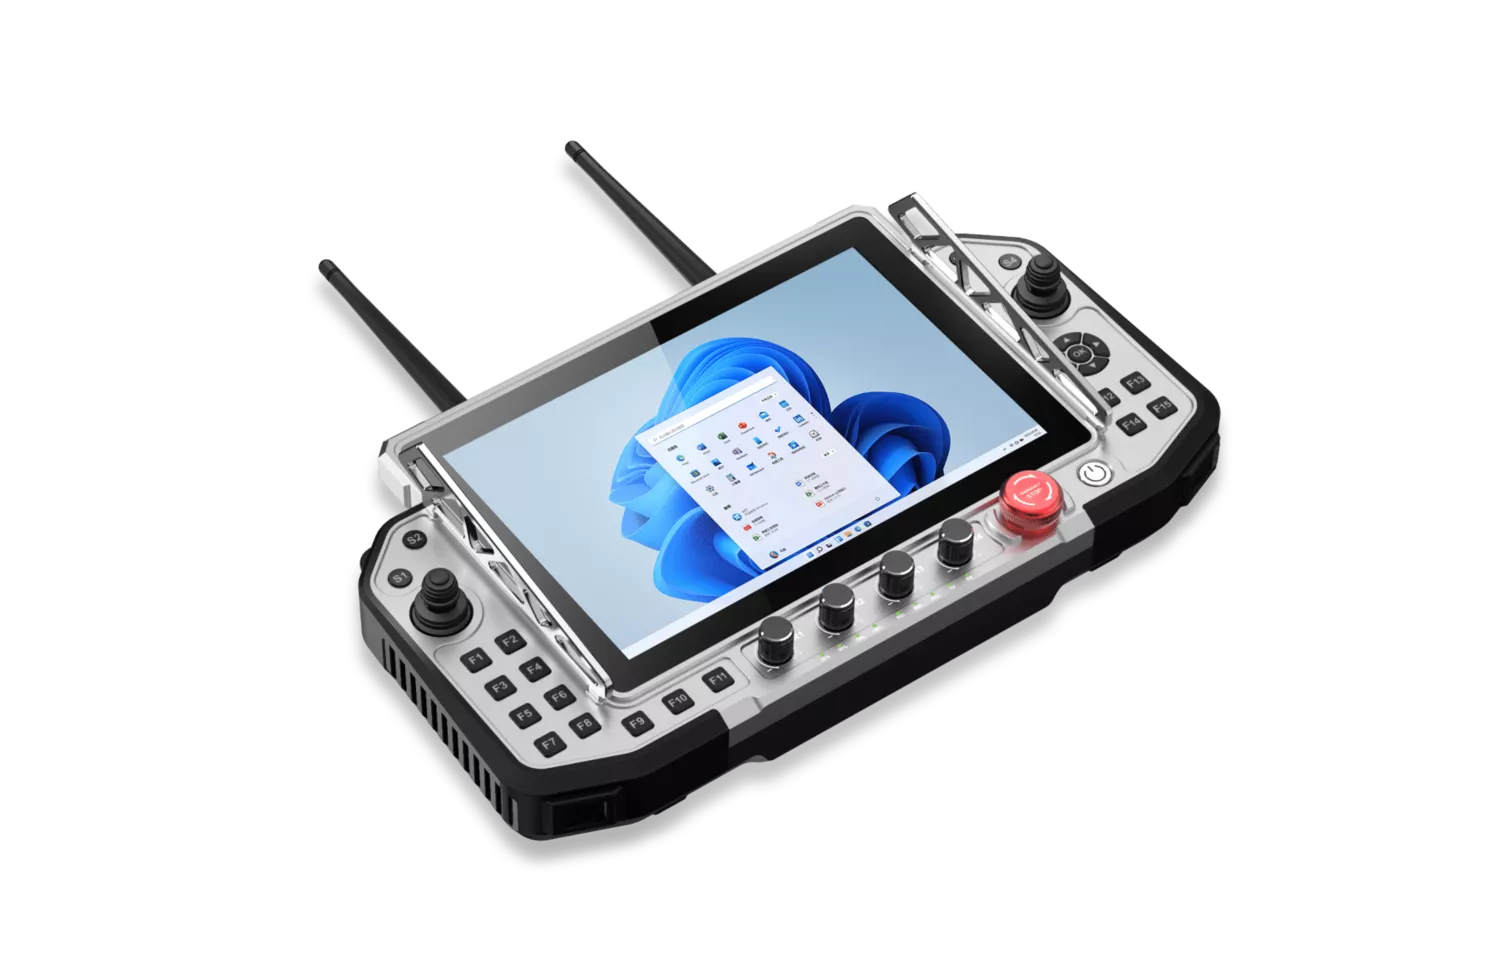 T31N handheld GCS (without communications)